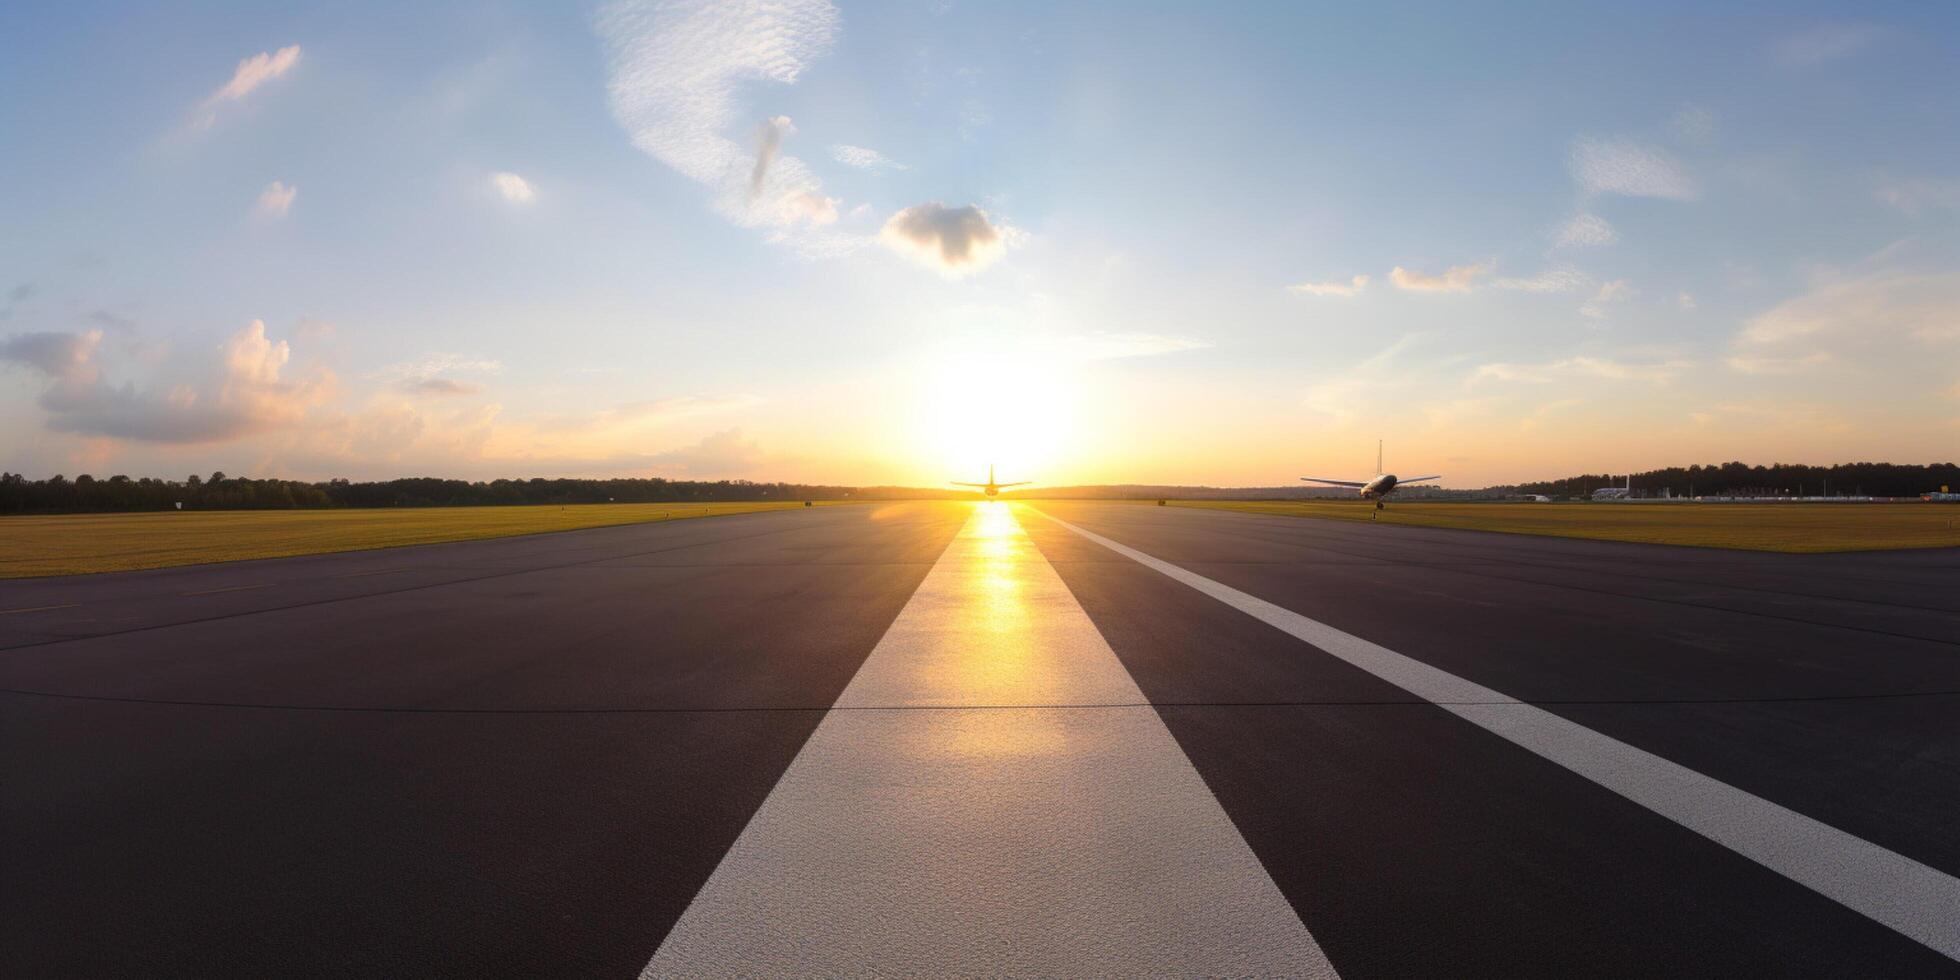 A picture of an airport with a sunset photo